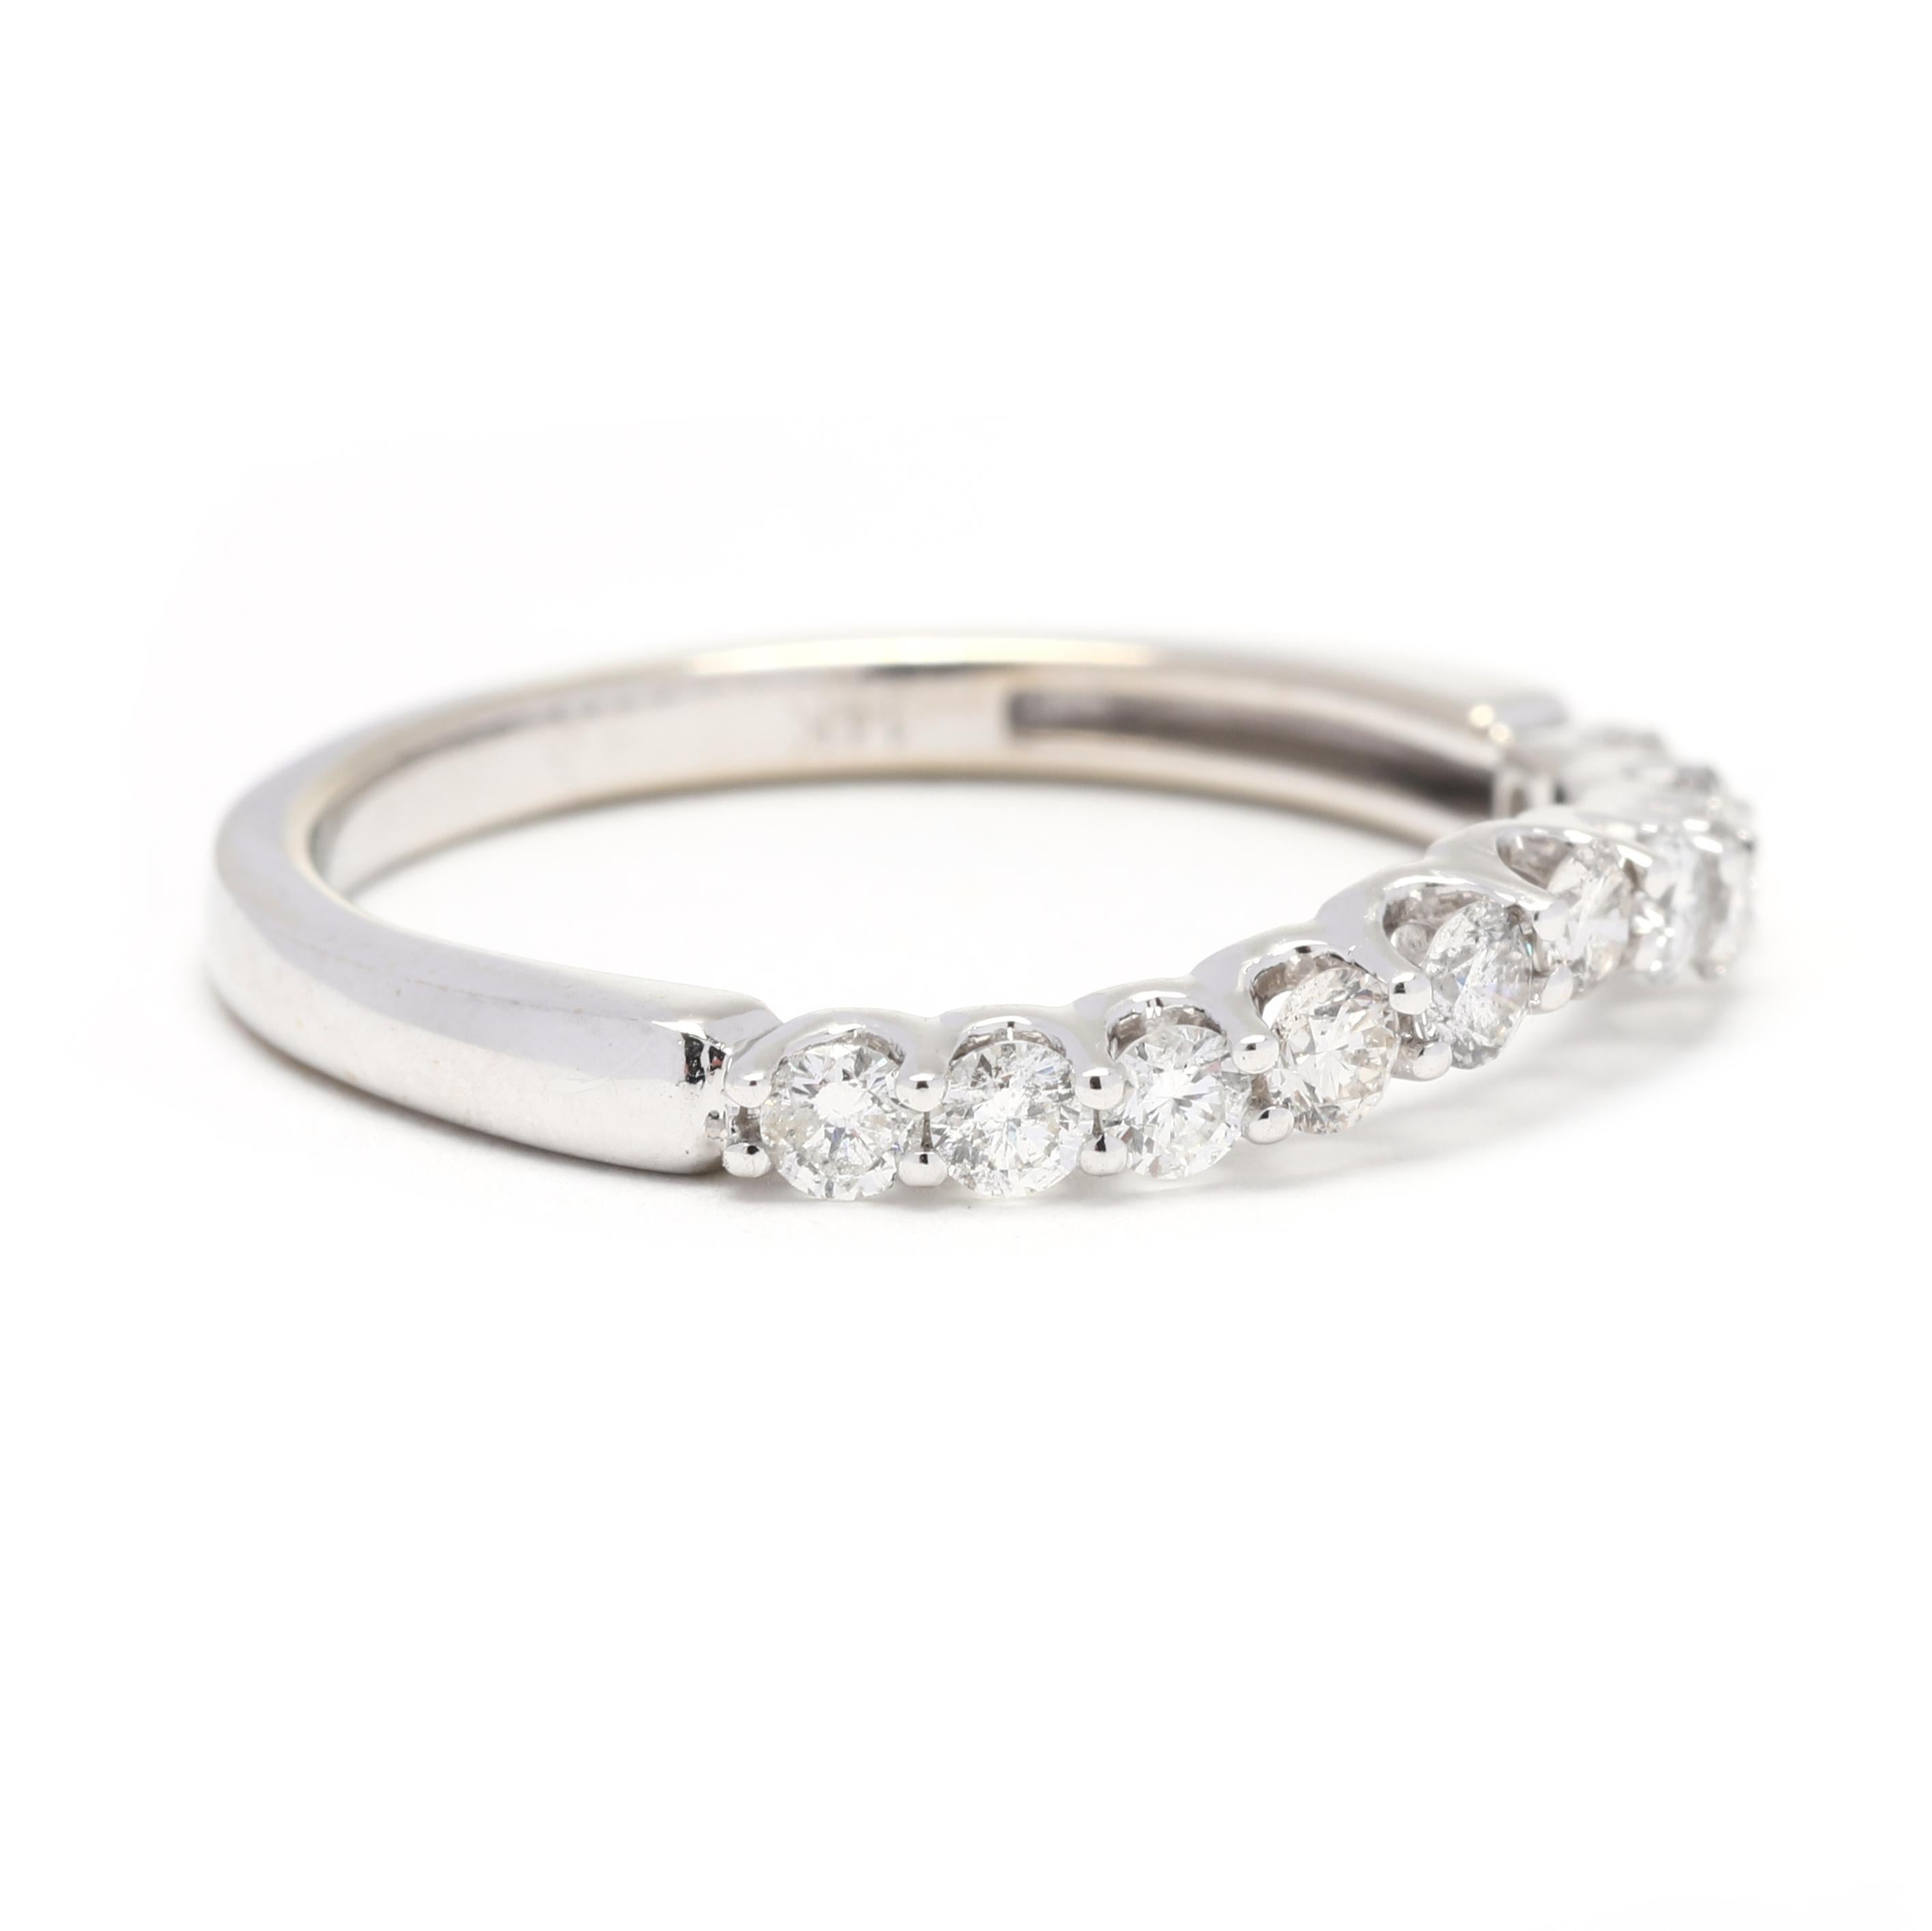 This stunning 0.40ctw curved diamond band is a perfect accent to any look! Crafted from 14K white gold and set with an incredible two rows of diamonds that curve and sparkle, this elegant ring is sure to captivate attention. With a simple yet